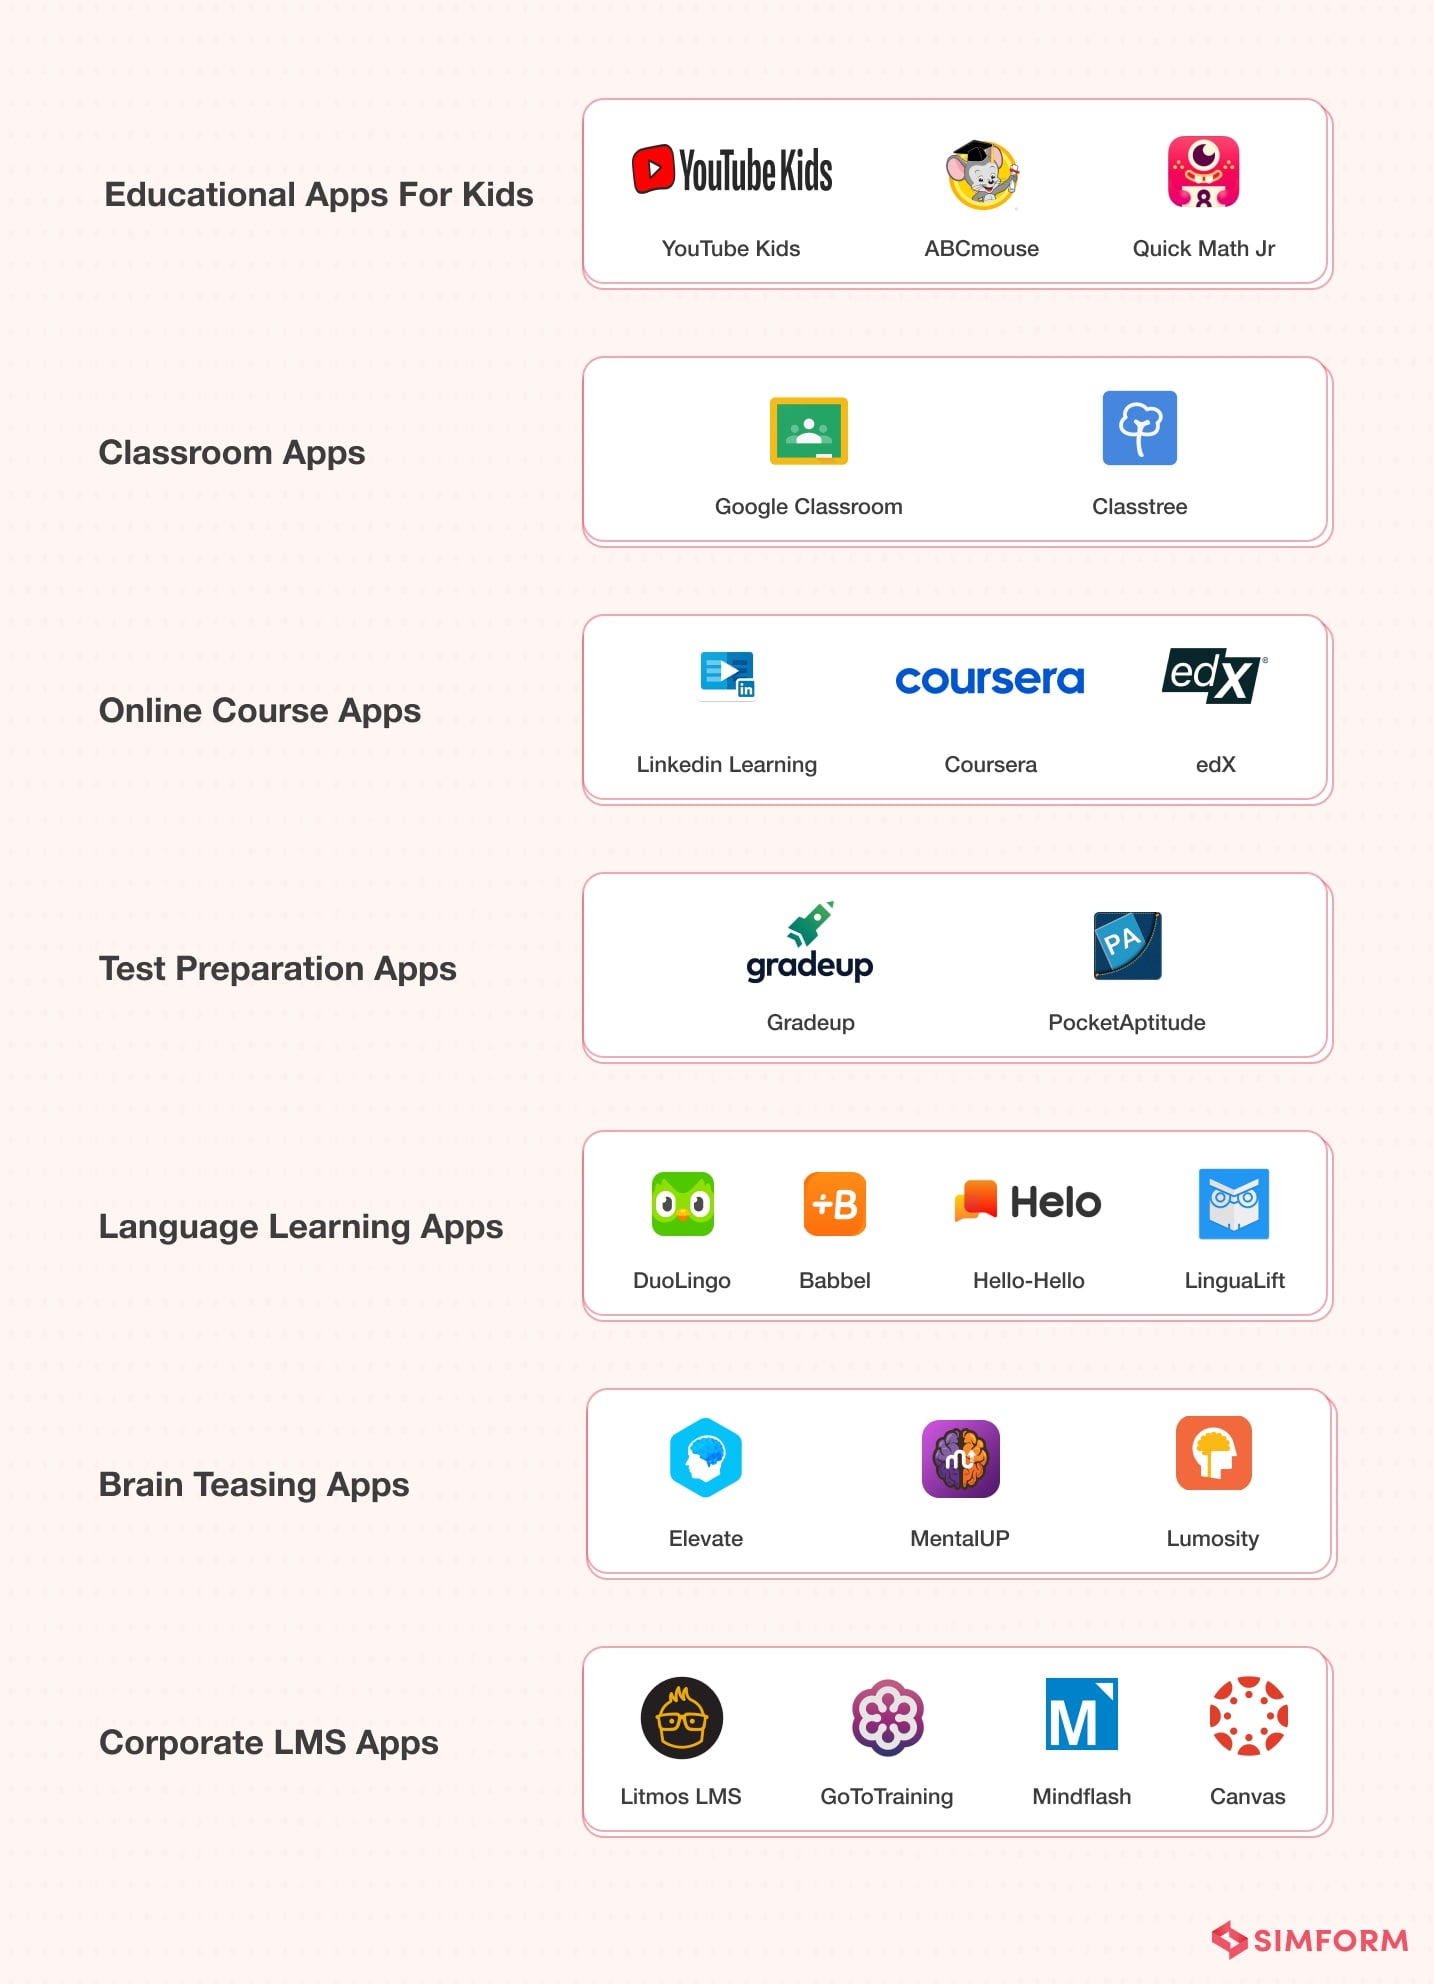 educational apps category